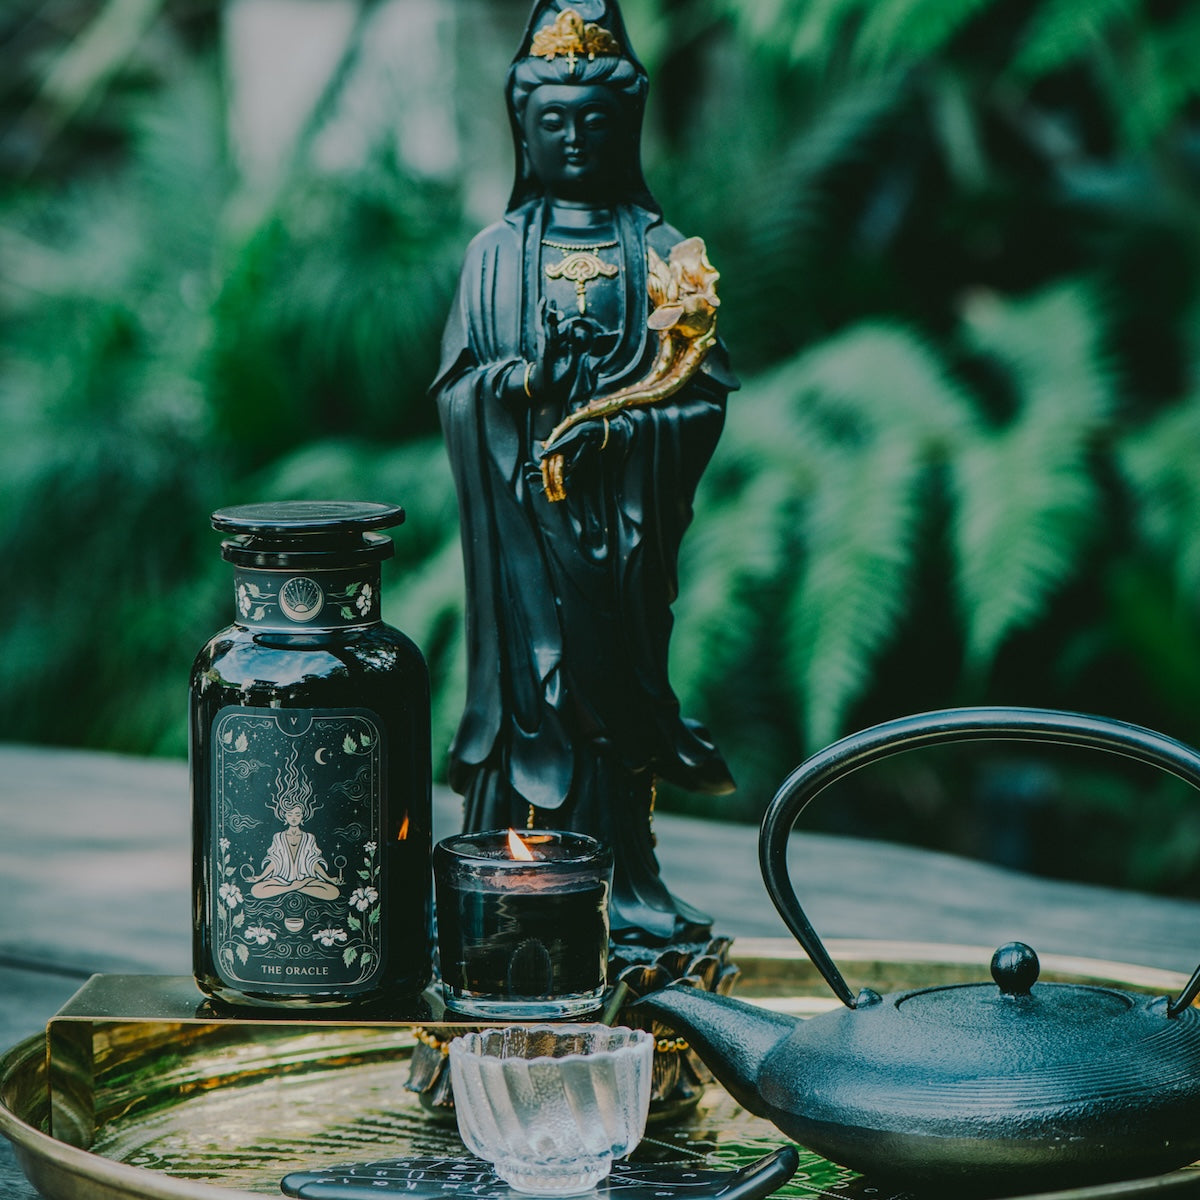 A black statue stands on a tray with an ornate black jar, a small candle in a holder, and a black teapot. The background features lush greenery, creating a serene atmosphere perfect for enjoying Magic Hour&#39;s Monthly Magic First Sips Tea Subscription Box.